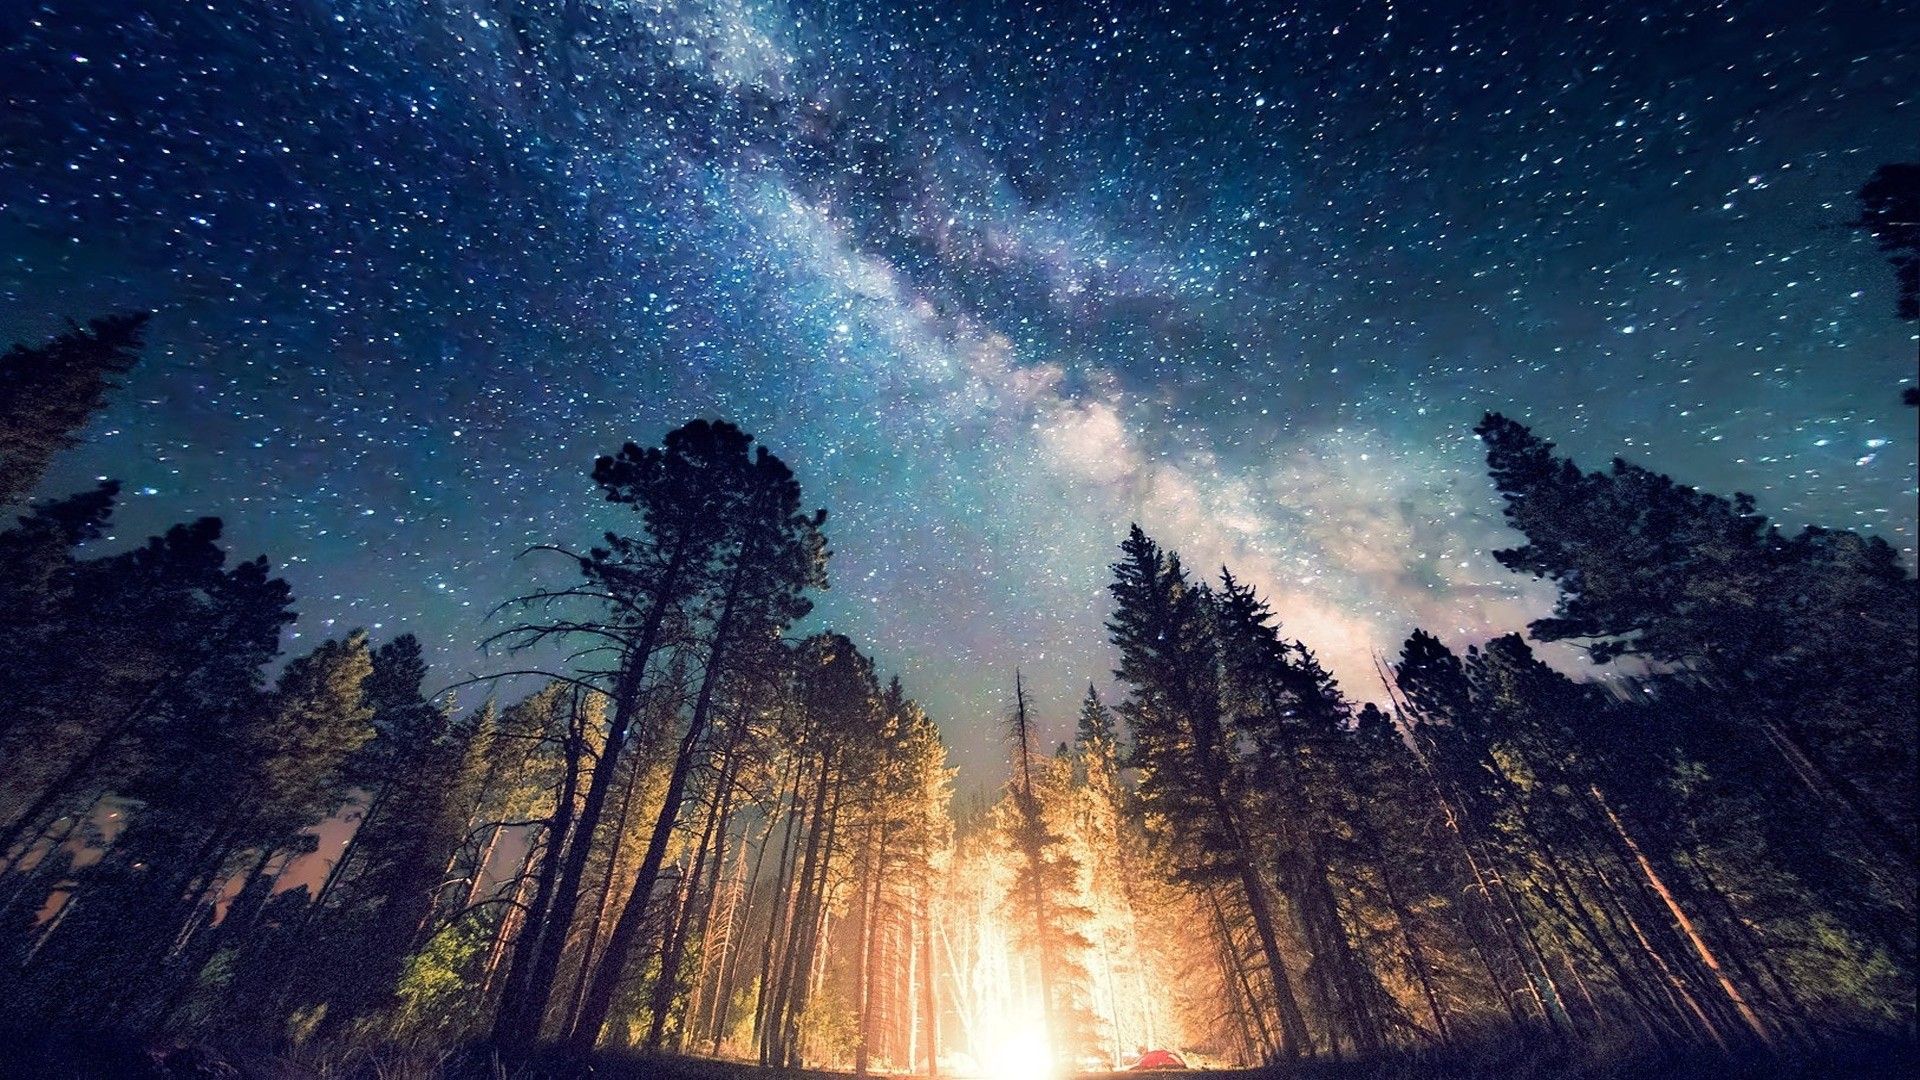 A fire in the woods underneath an amazing night sky - 1920x1080, camping